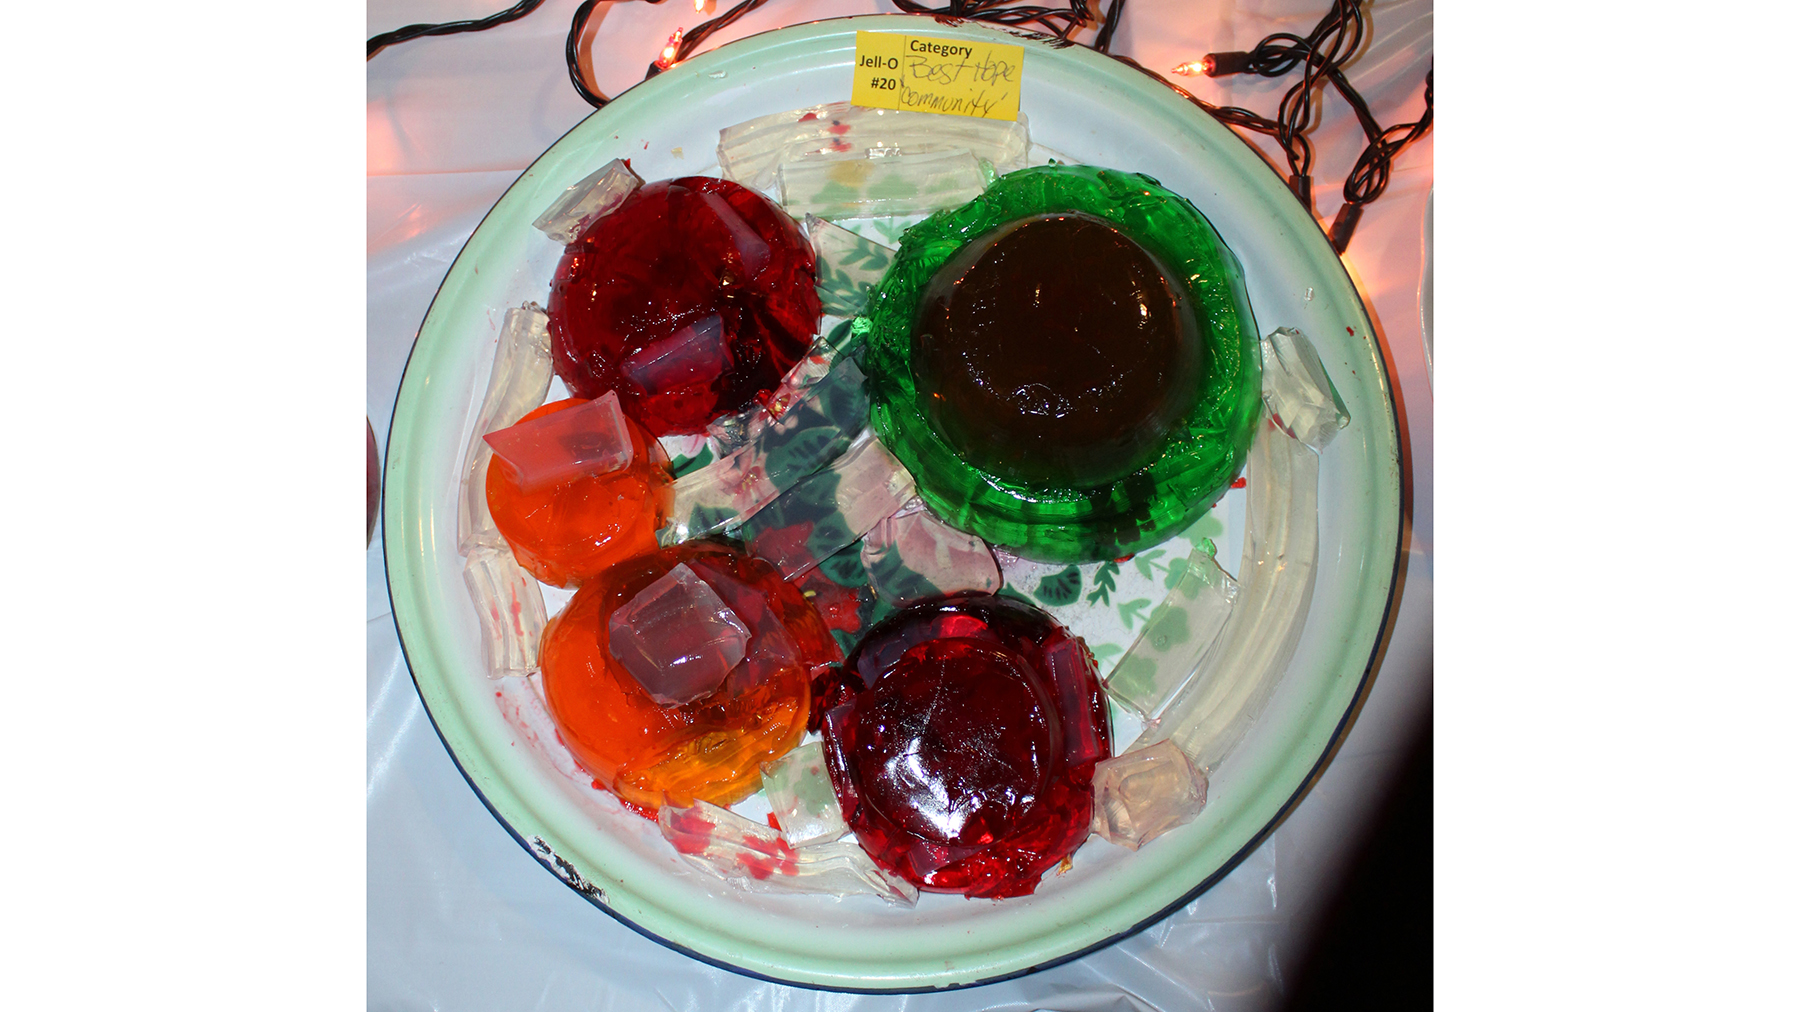 2024 Jell-O No. 20: Best Hope for the Future: Community